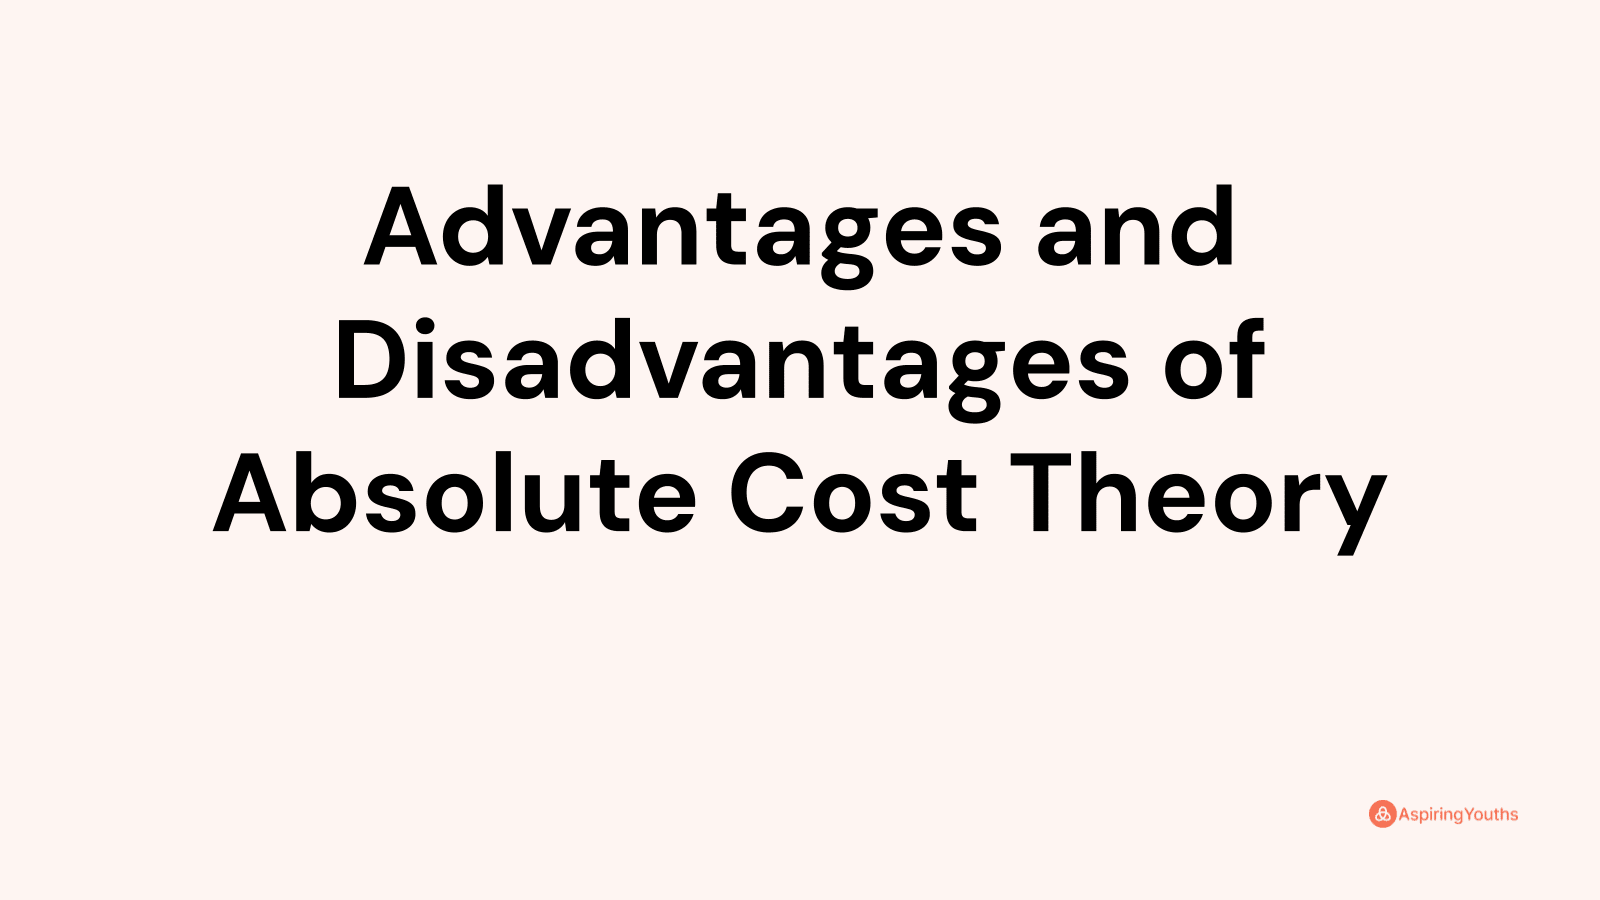 Advantages and disadvantages of Absolute Cost Theory